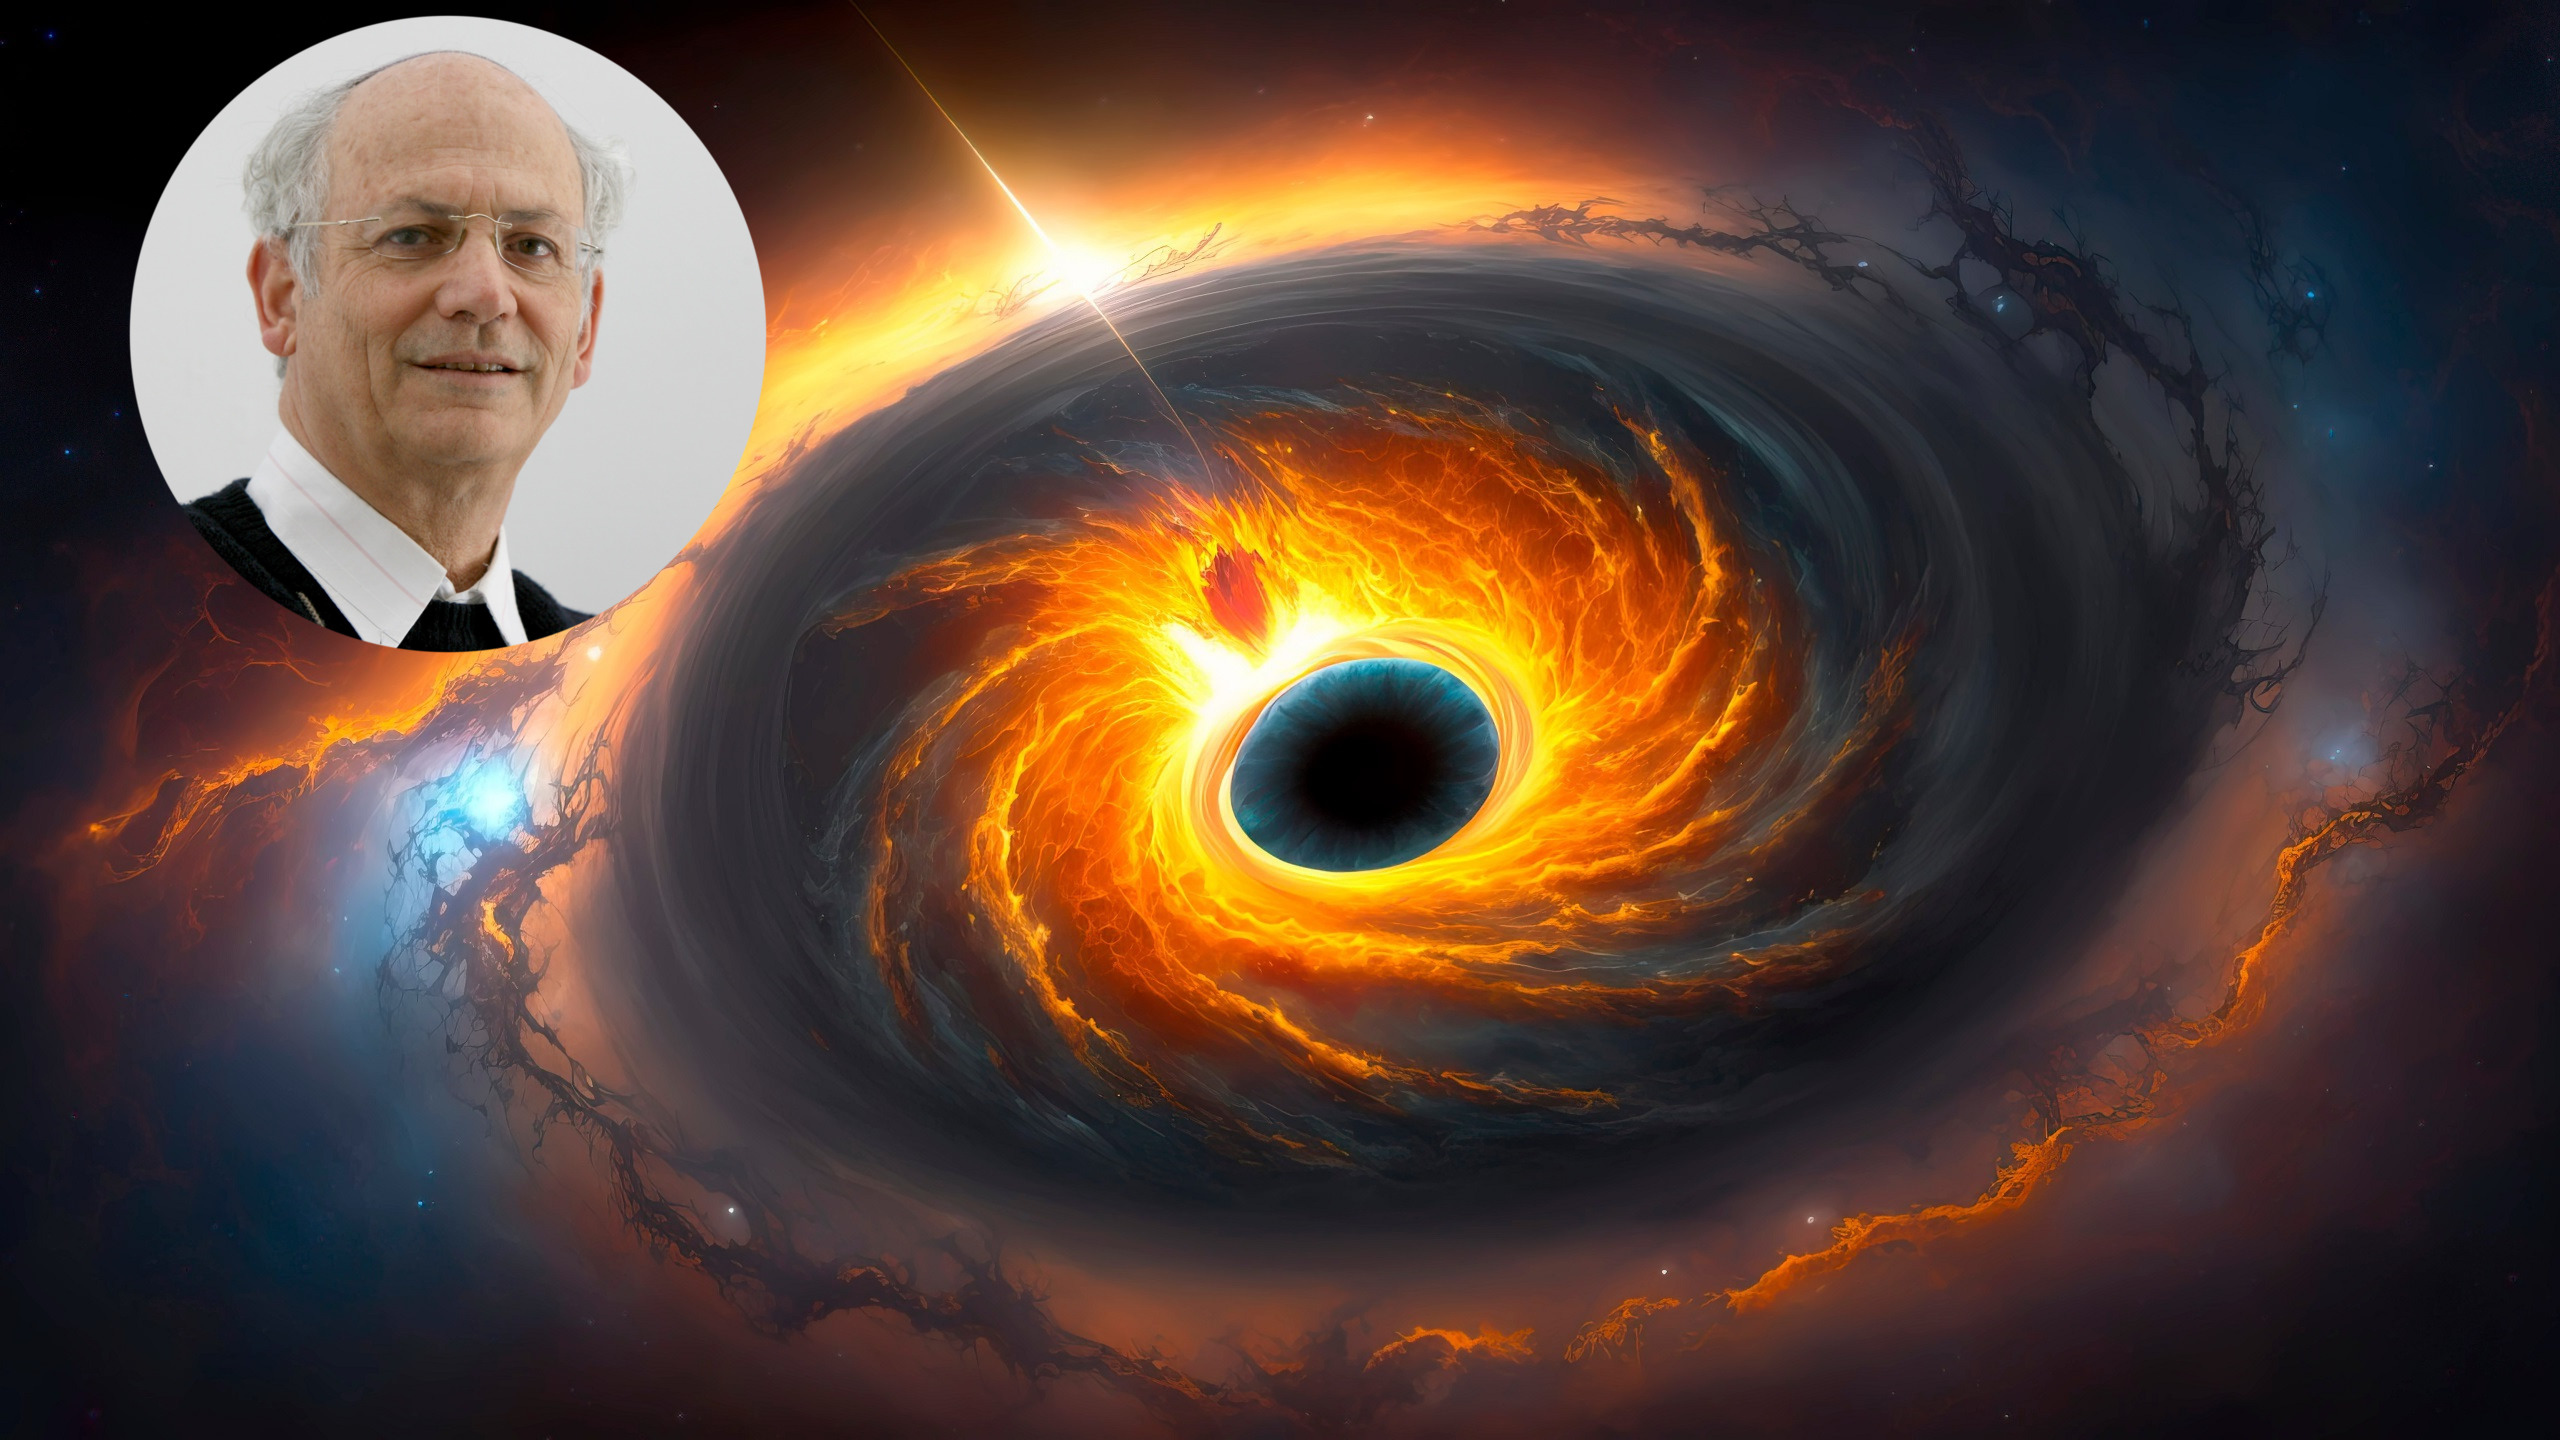 Israeli Astronomer: Discovery Provides ‘First Indisputable Proof’ of Stellar Black Hole This Massive